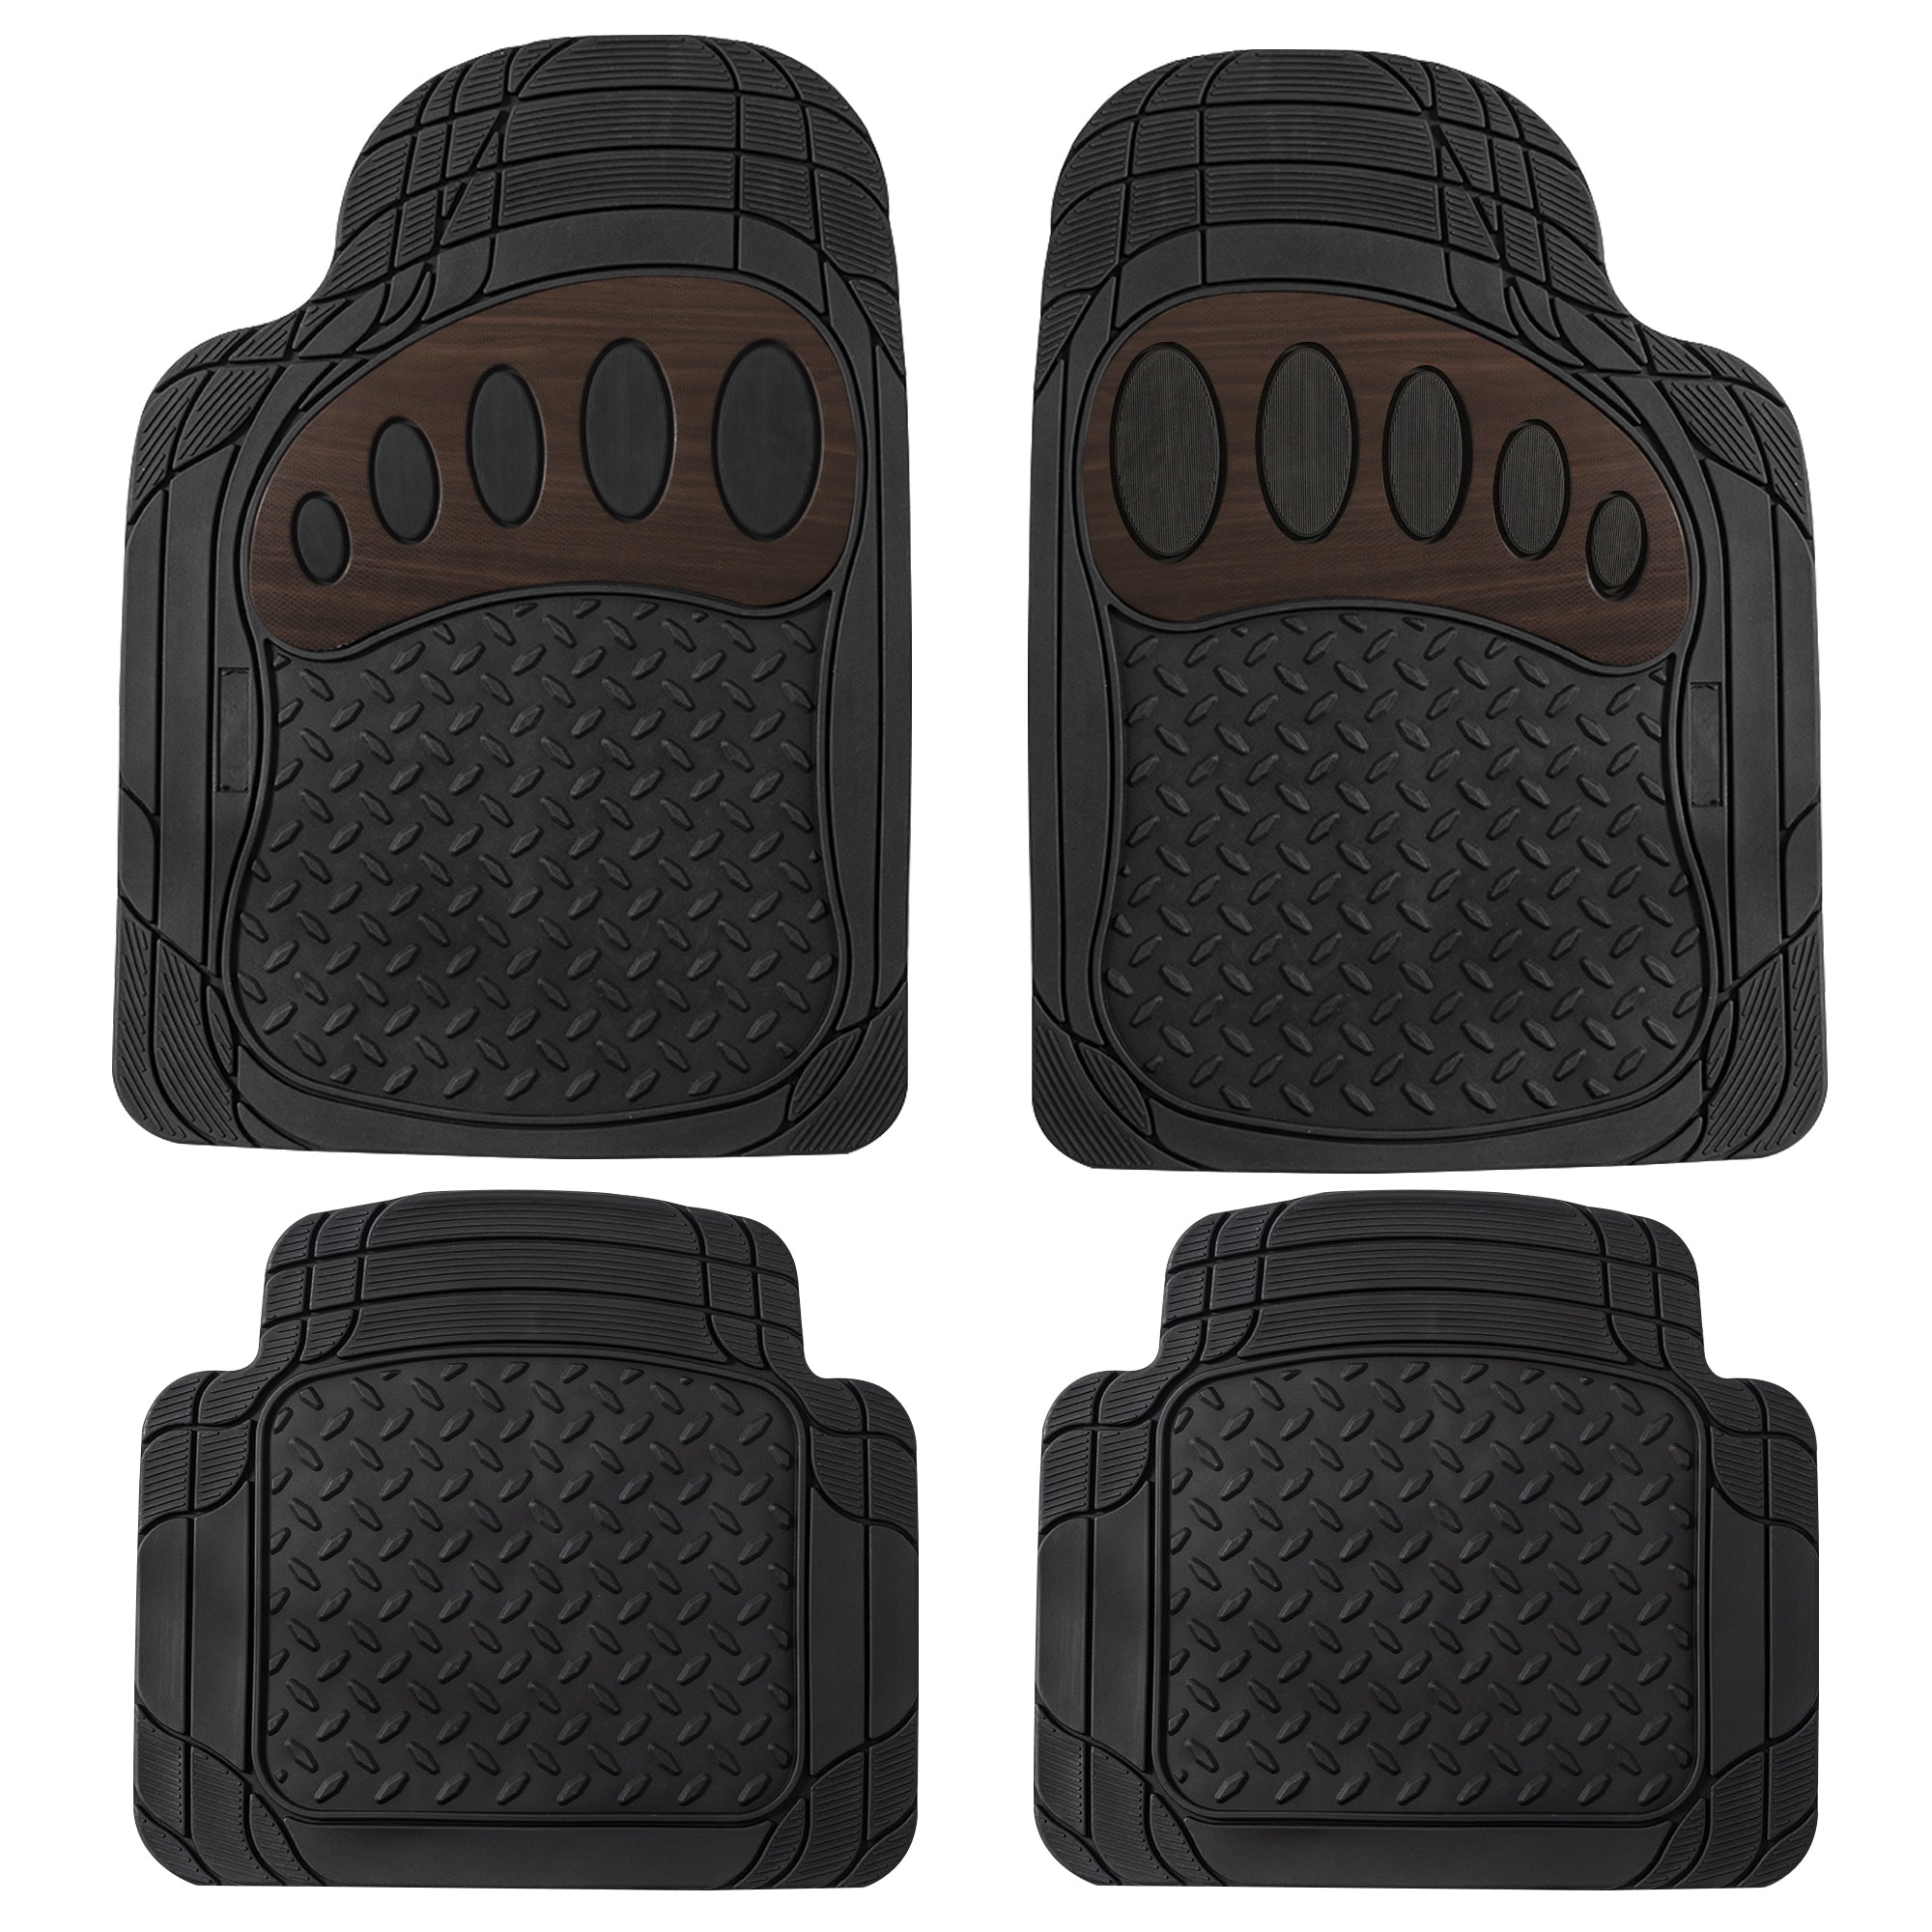 Trimmable ClimaProof Non-Slip Rubber Floor Mats With Footprint Design - Full Set Brown